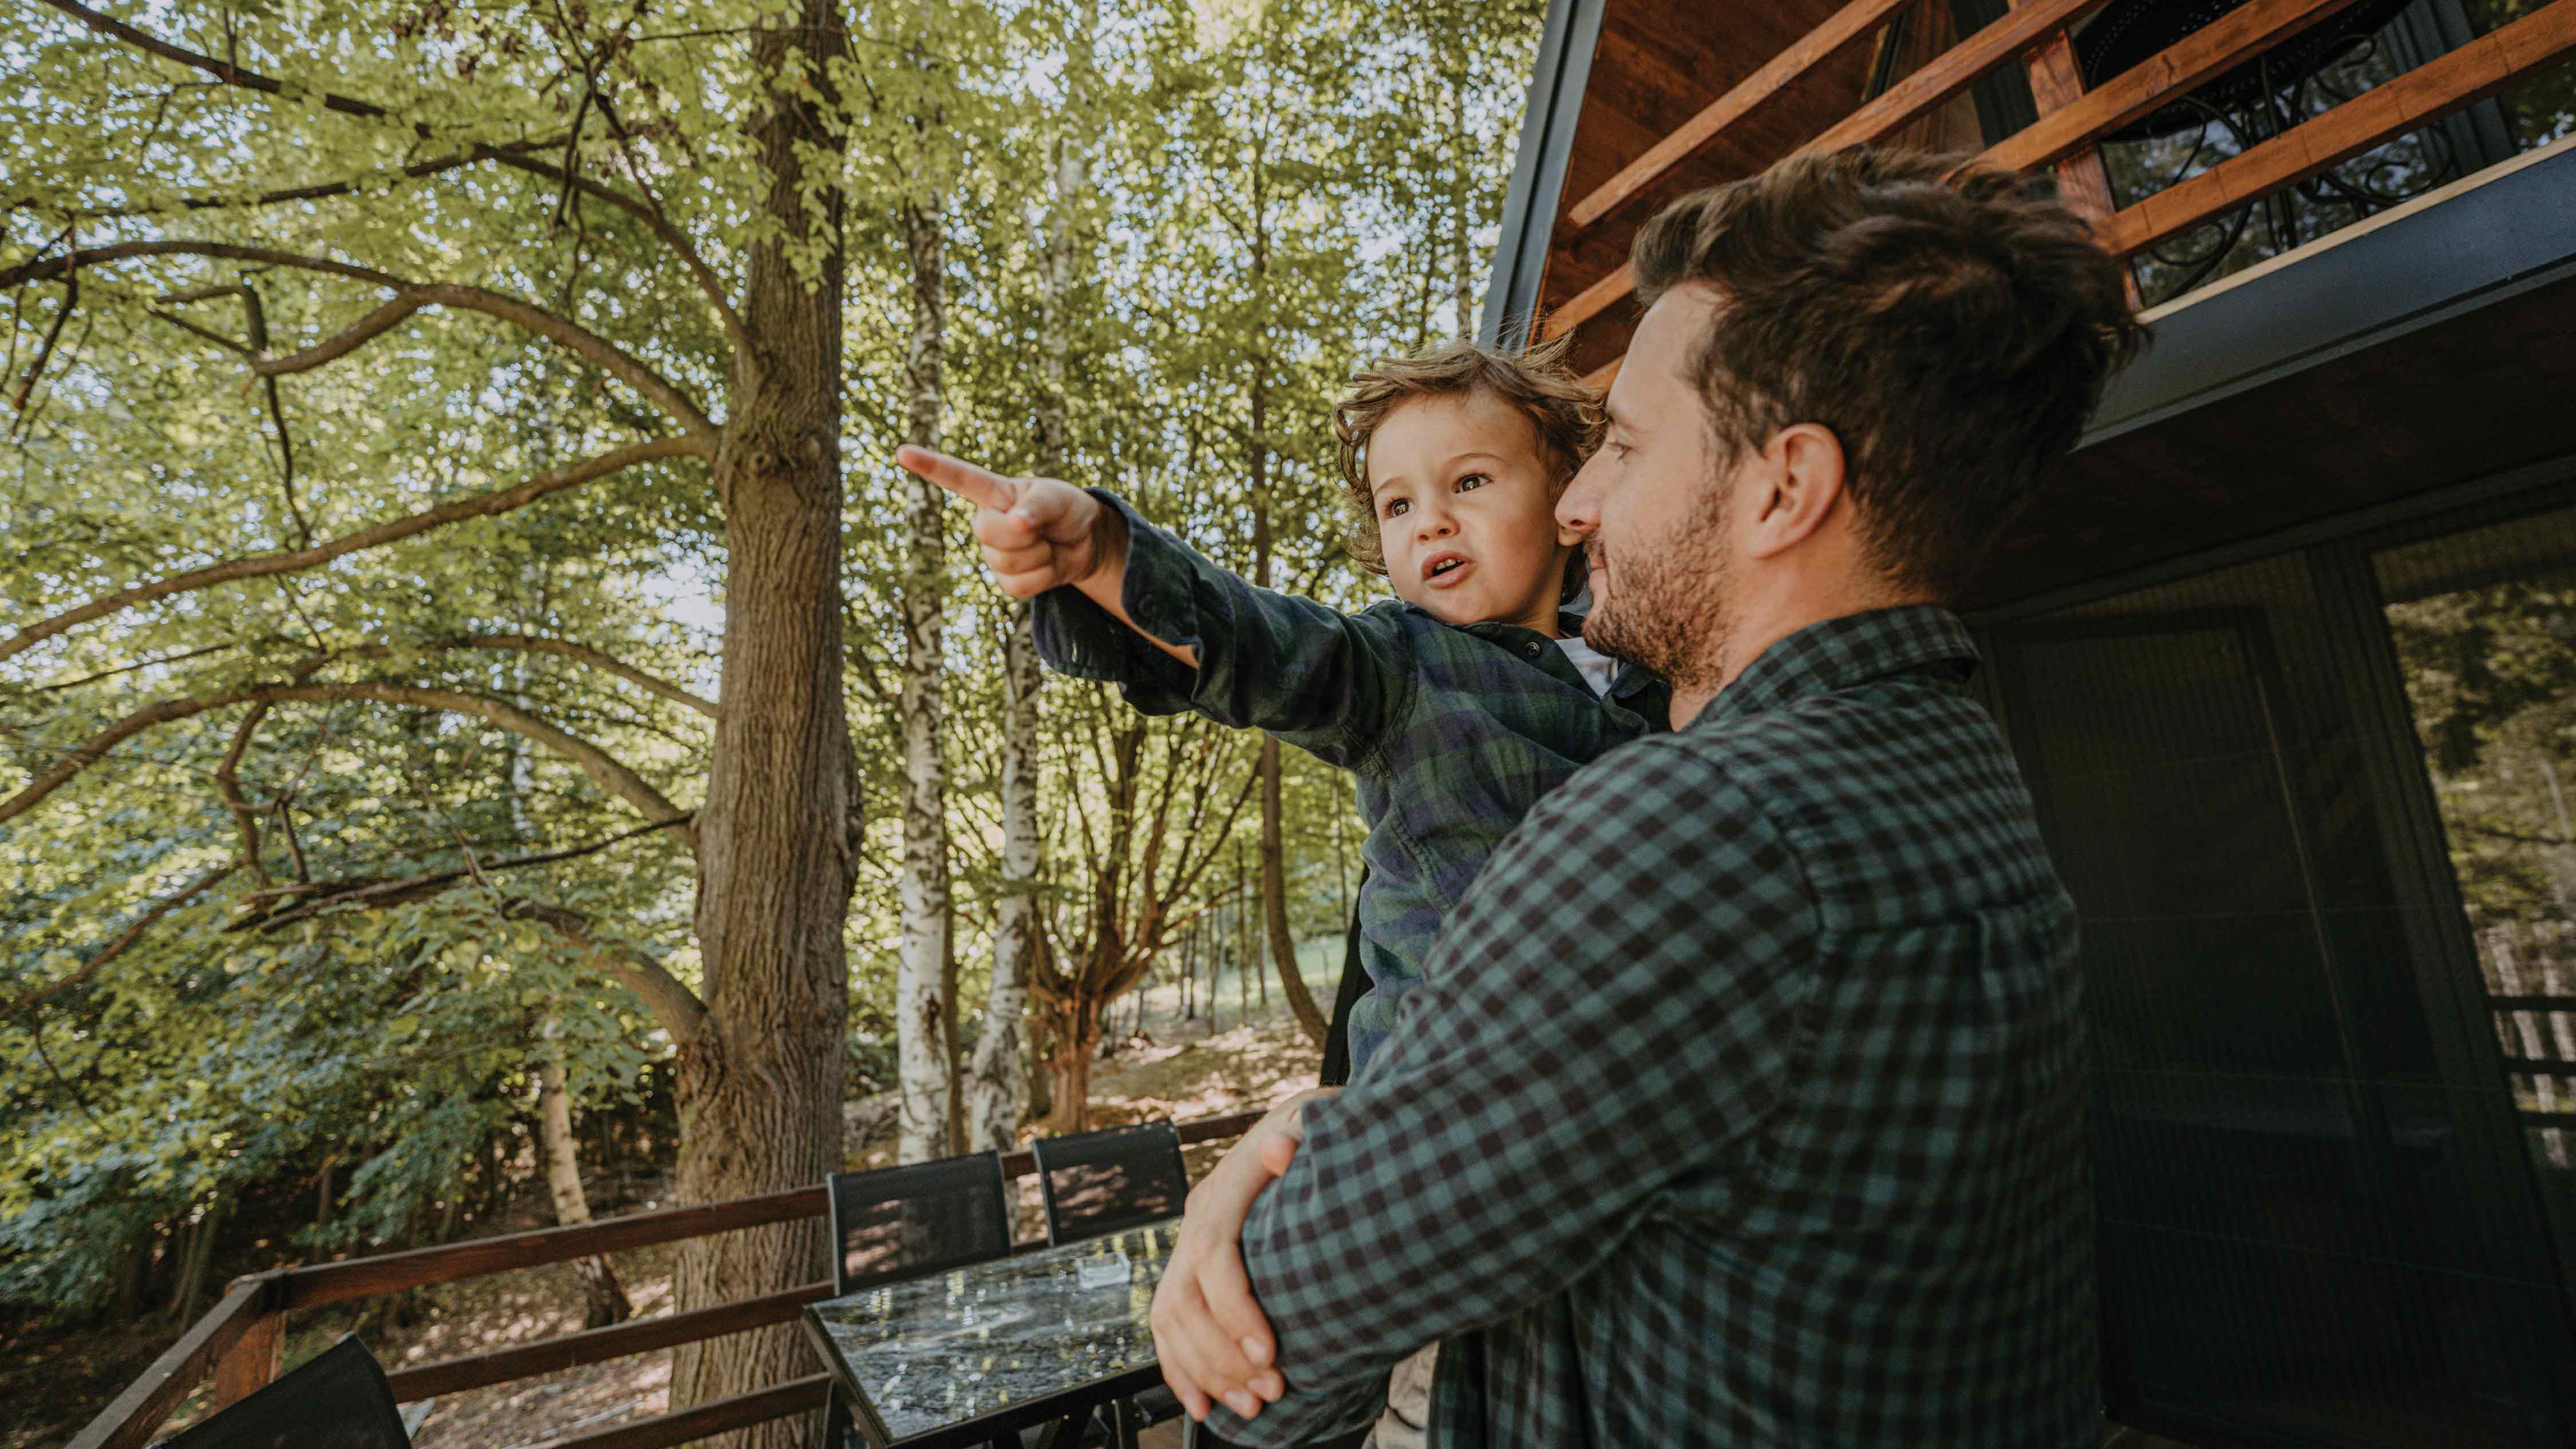 Dad hold a young boy on the porch on of a cabin in the woods